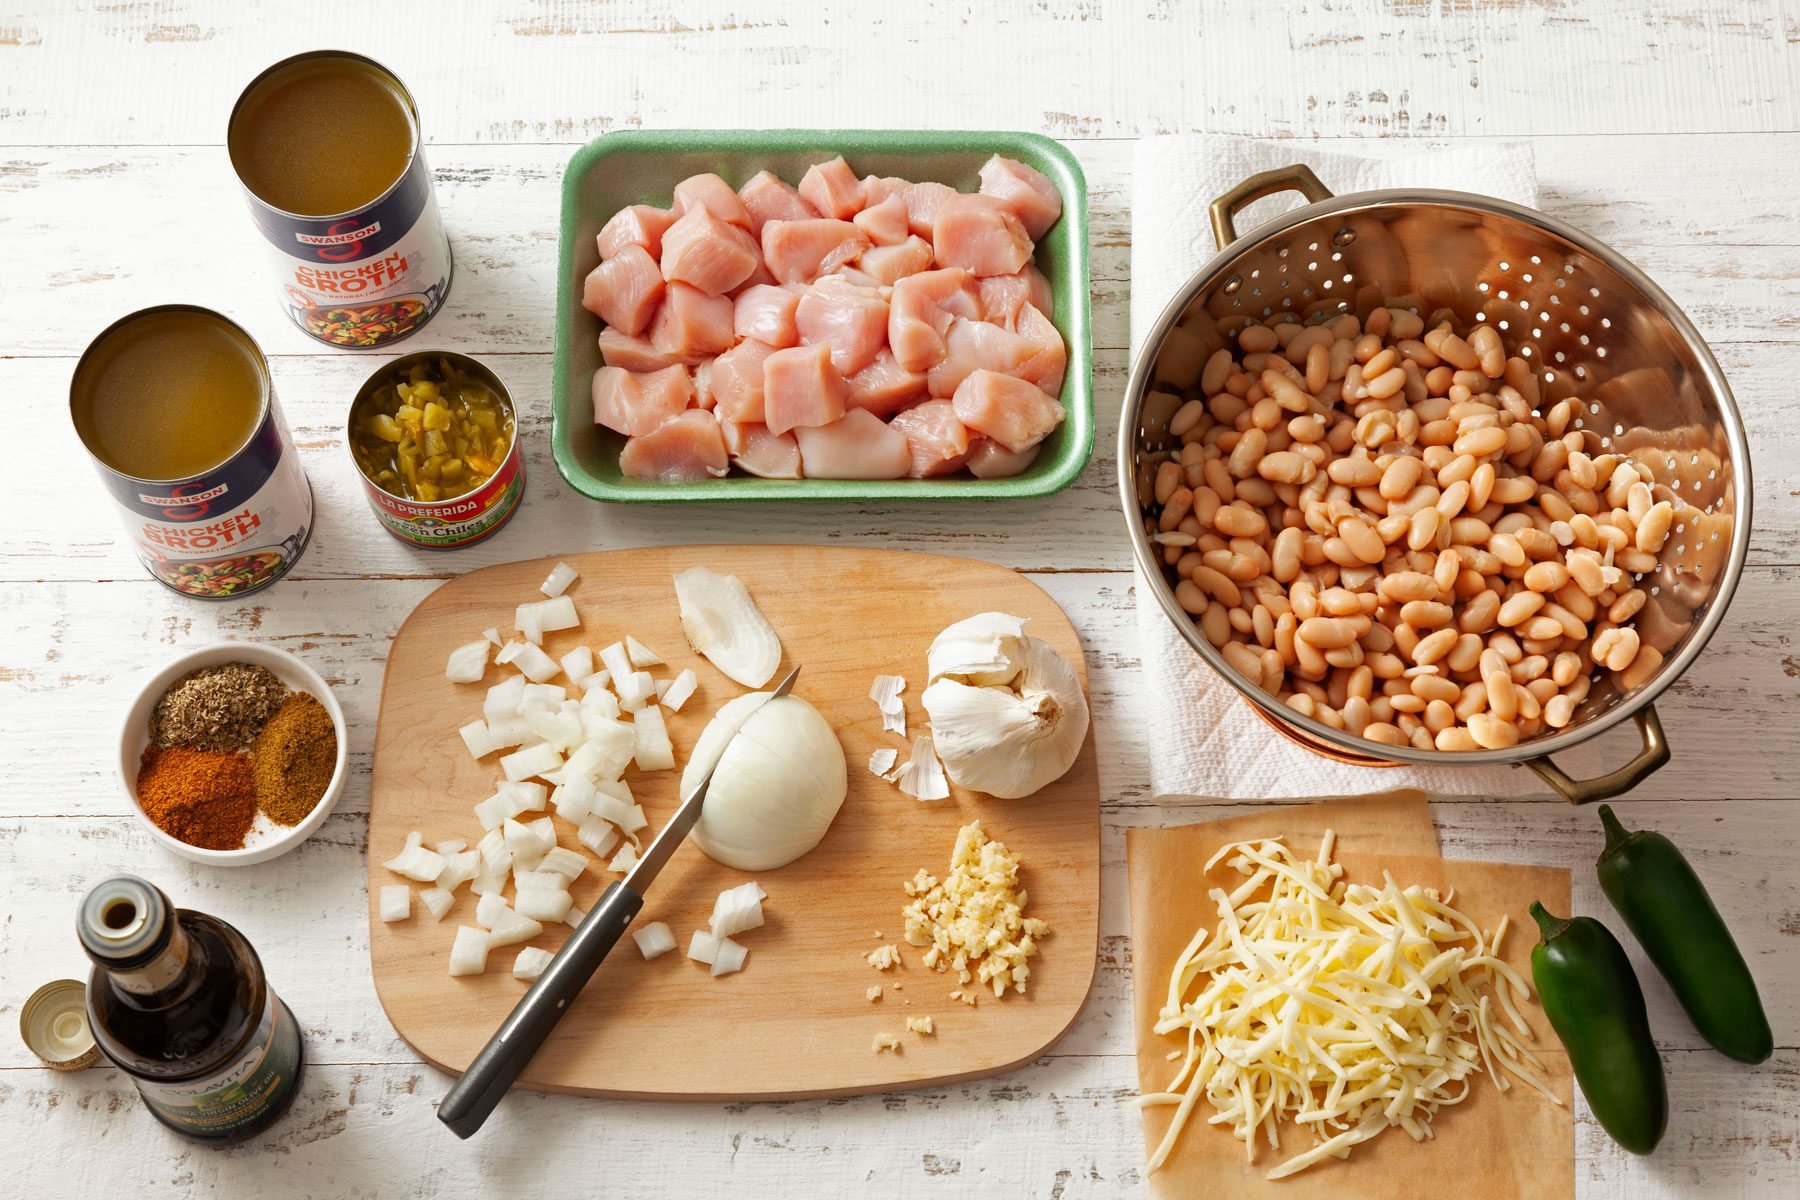 Ingredients to make White Chicken Chili place on a wooden surface